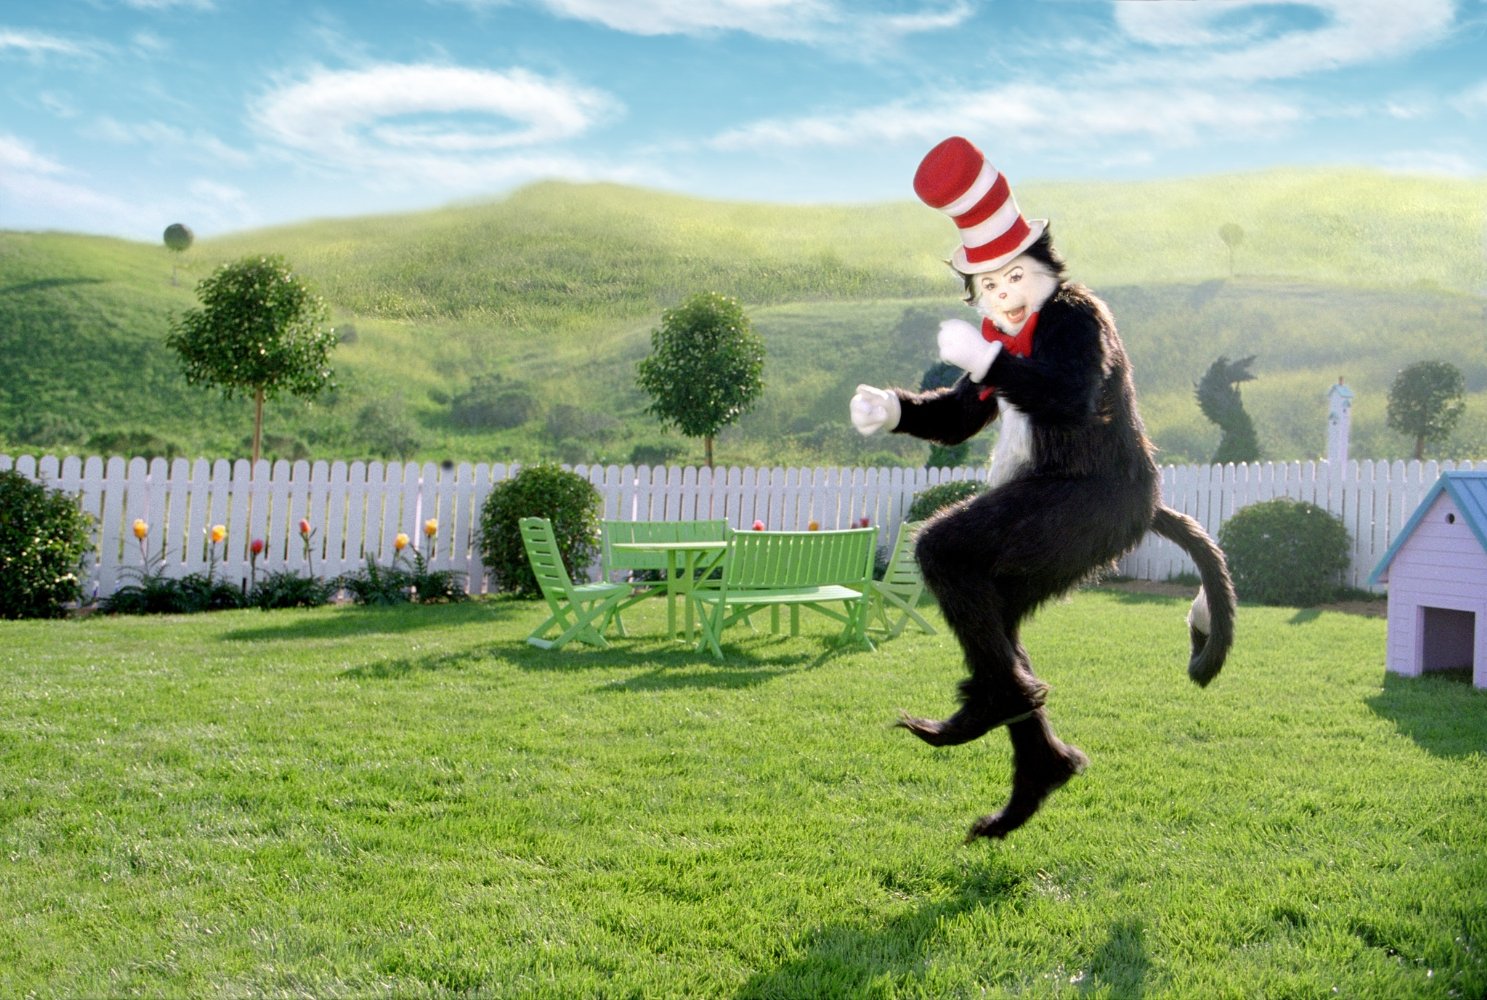 Dr. Seuss The Cat In The Hat 2003 Watch Online on 123Movies!